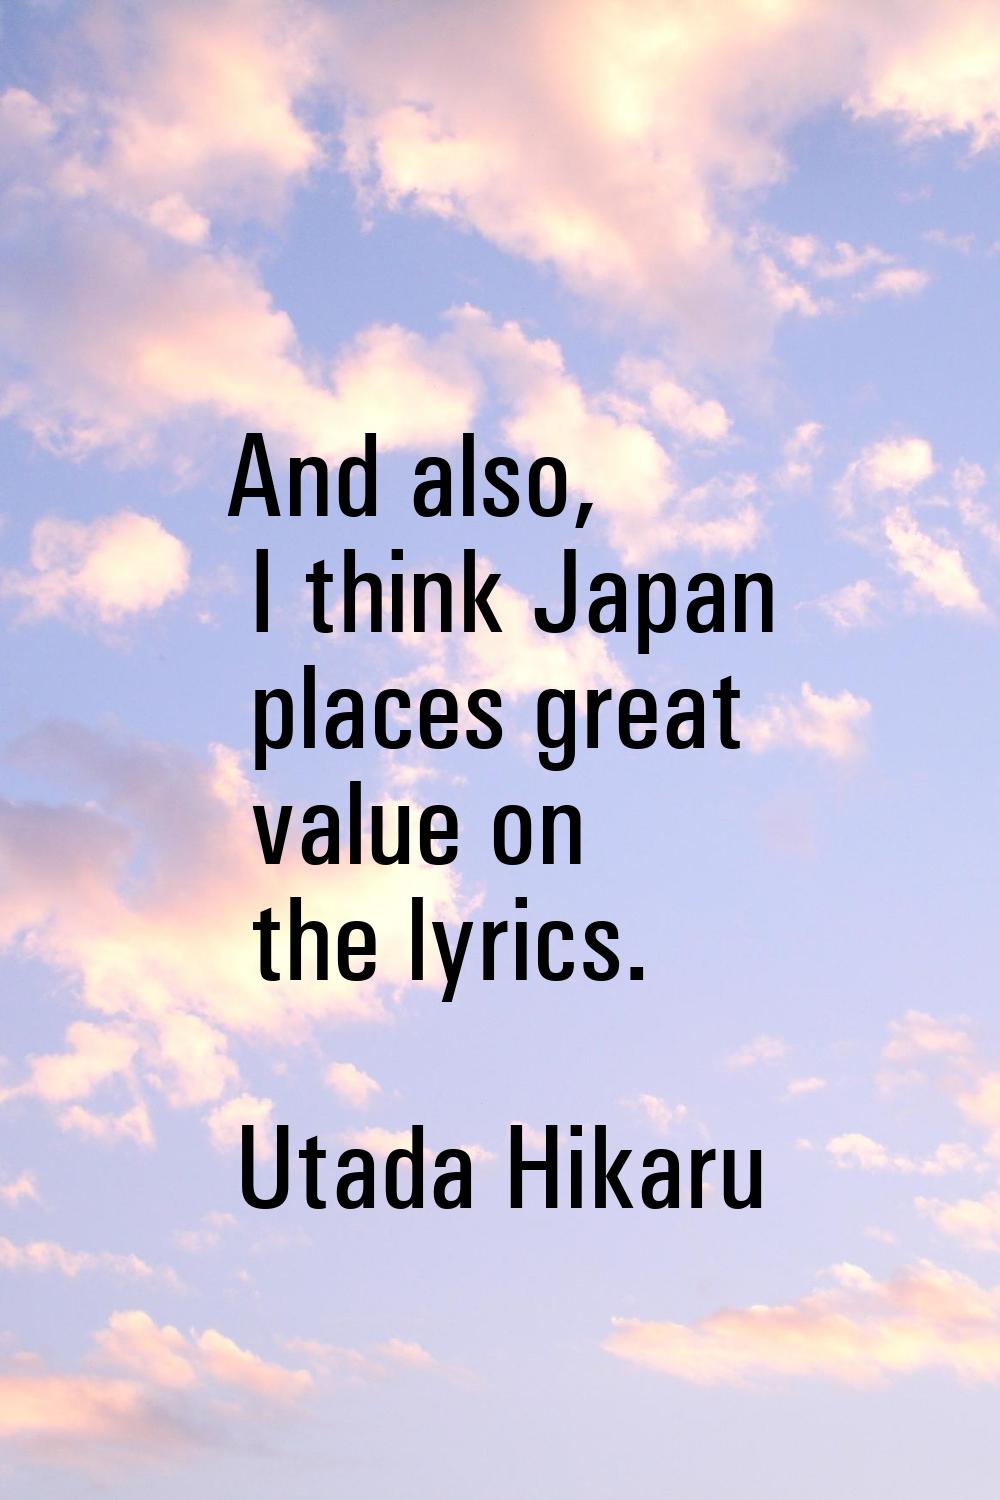 And also, I think Japan places great value on the lyrics.